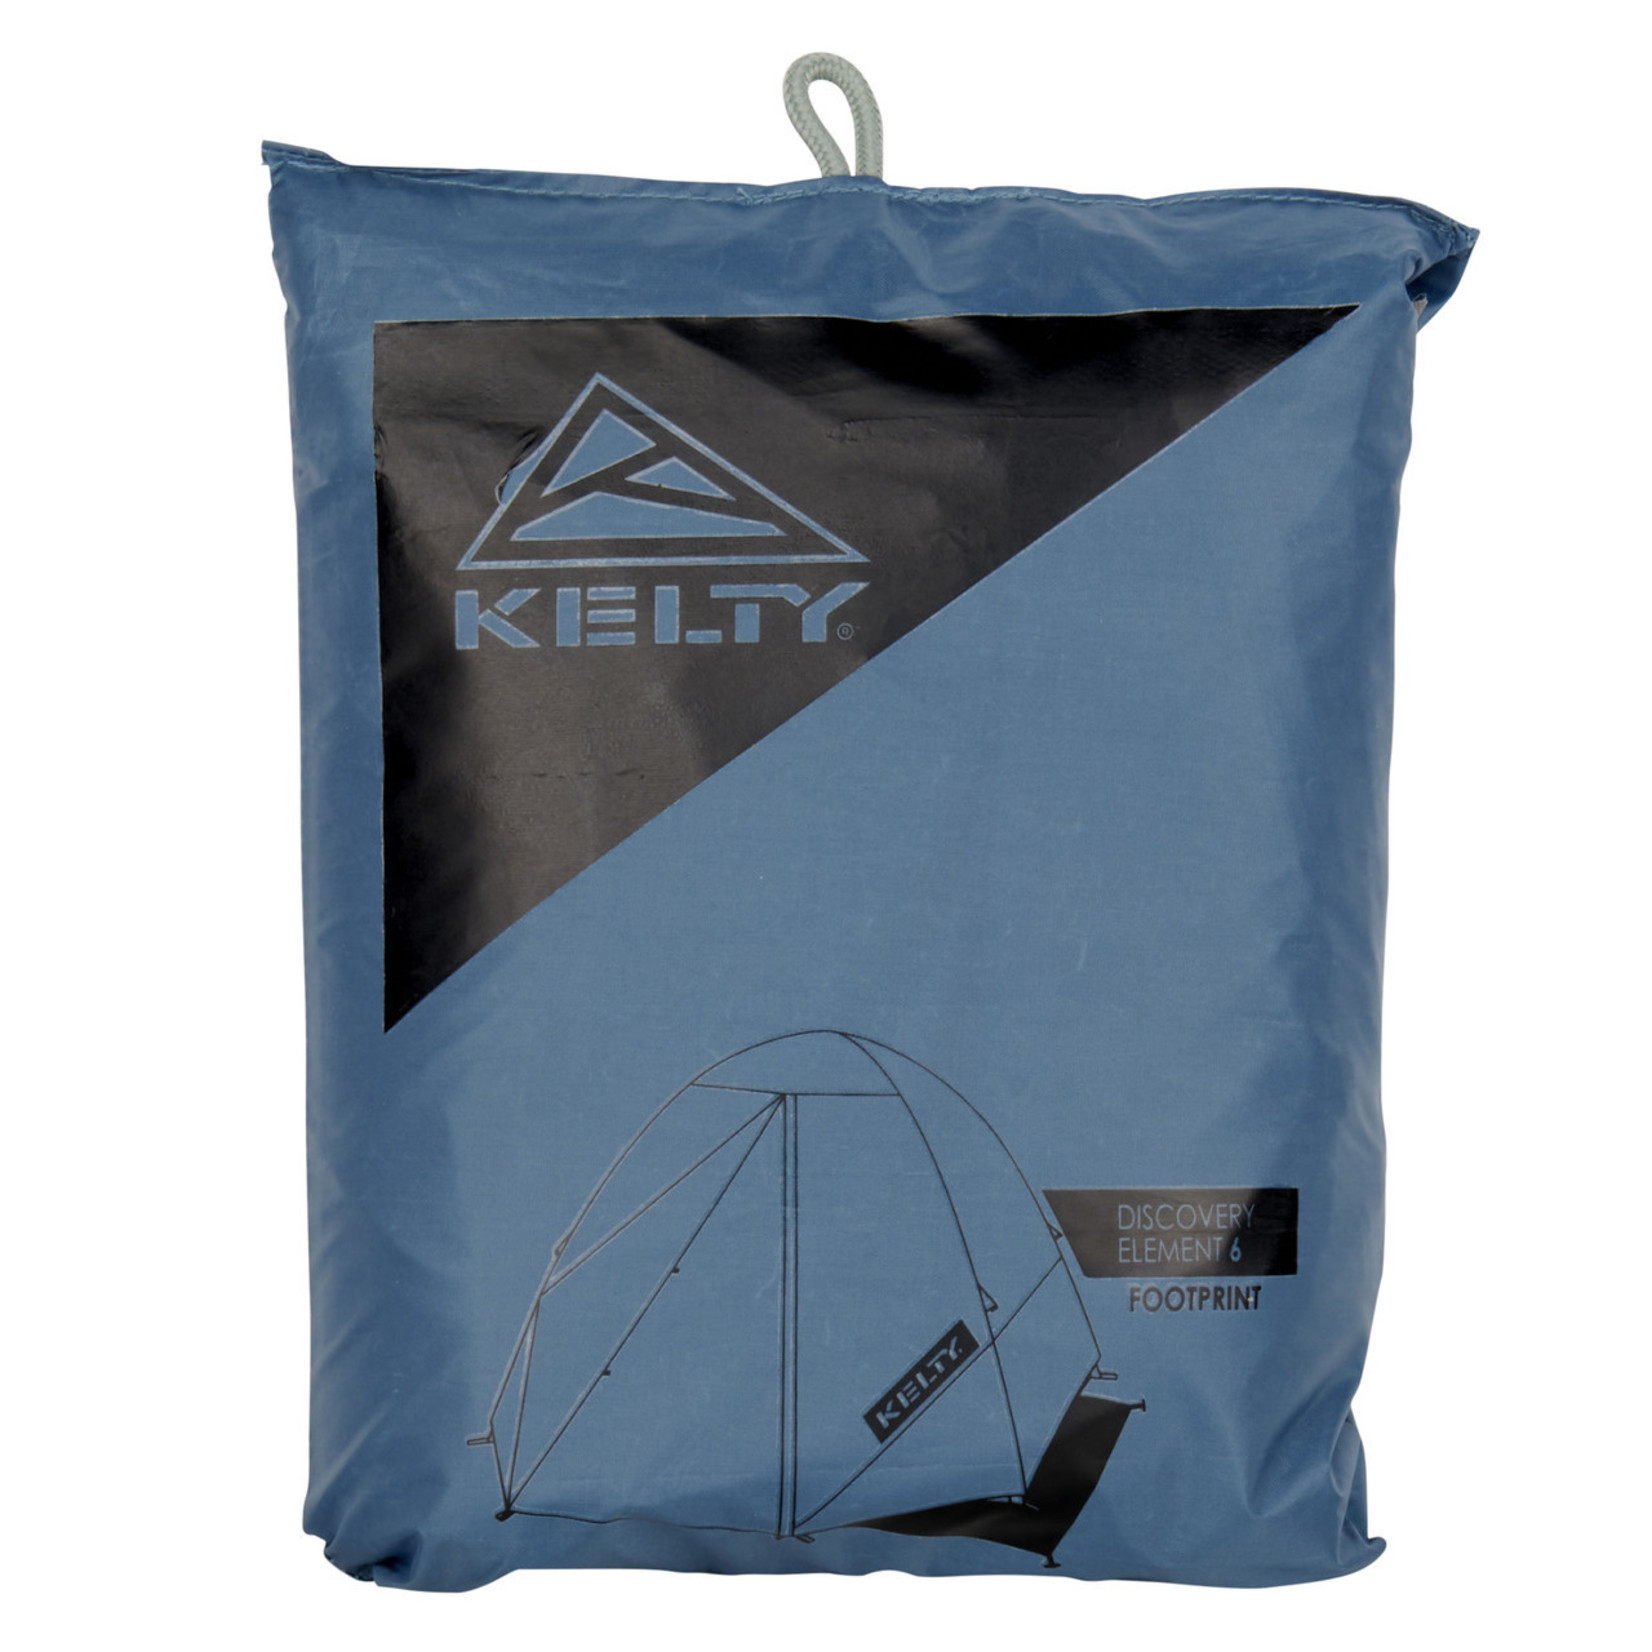 Kelty Kelty Discovery Element 6 Tent Footprint